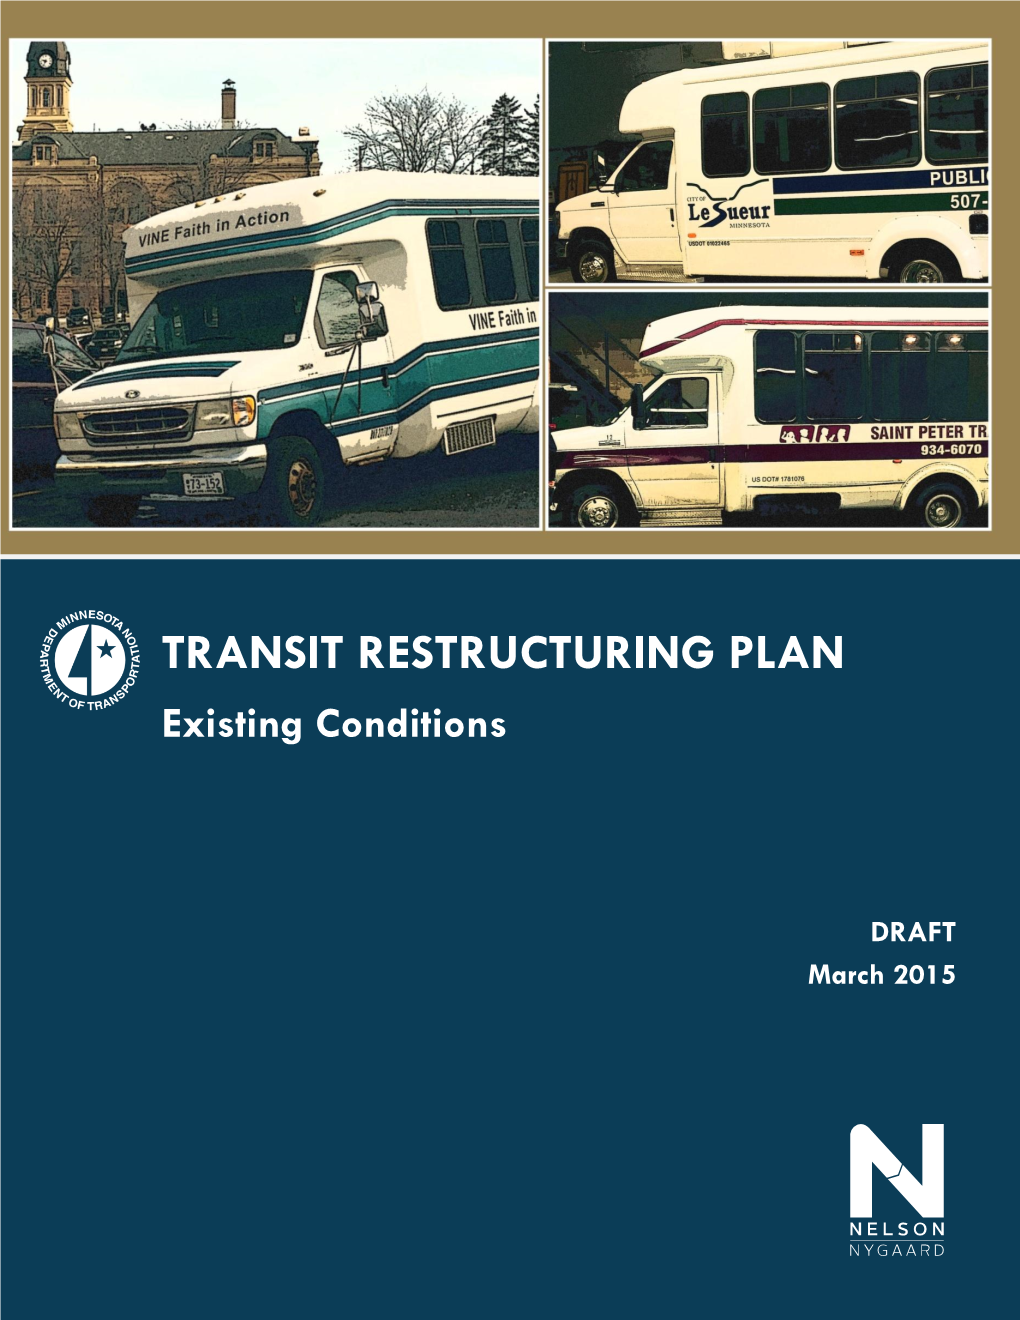 TRANSIT RESTRUCTURING PLAN Existing Conditions